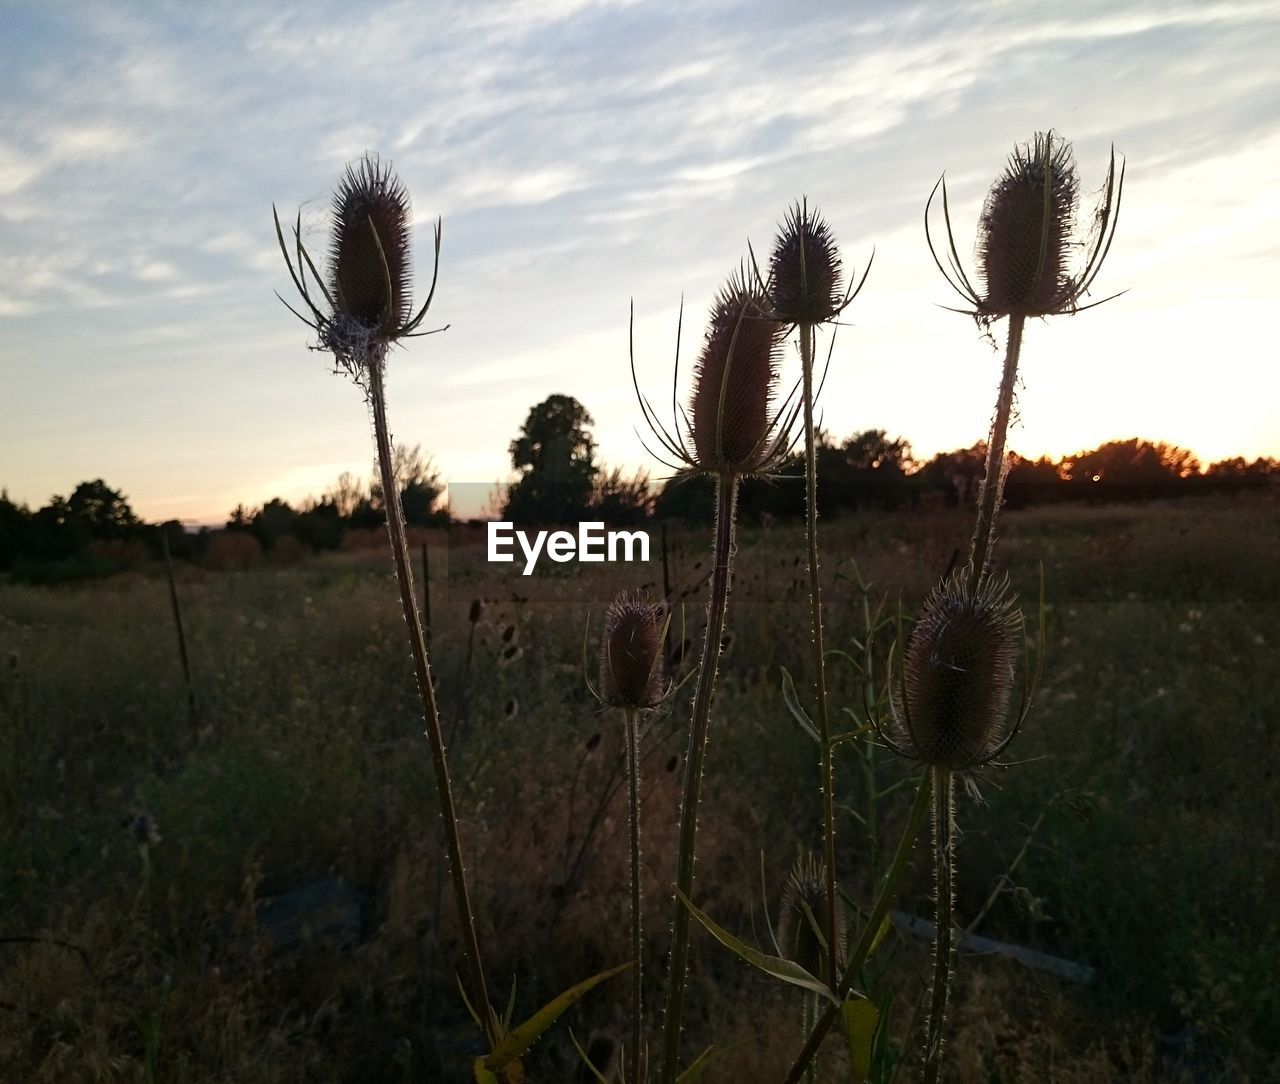 CLOSE-UP OF THISTLE AGAINST SKY AT SUNSET